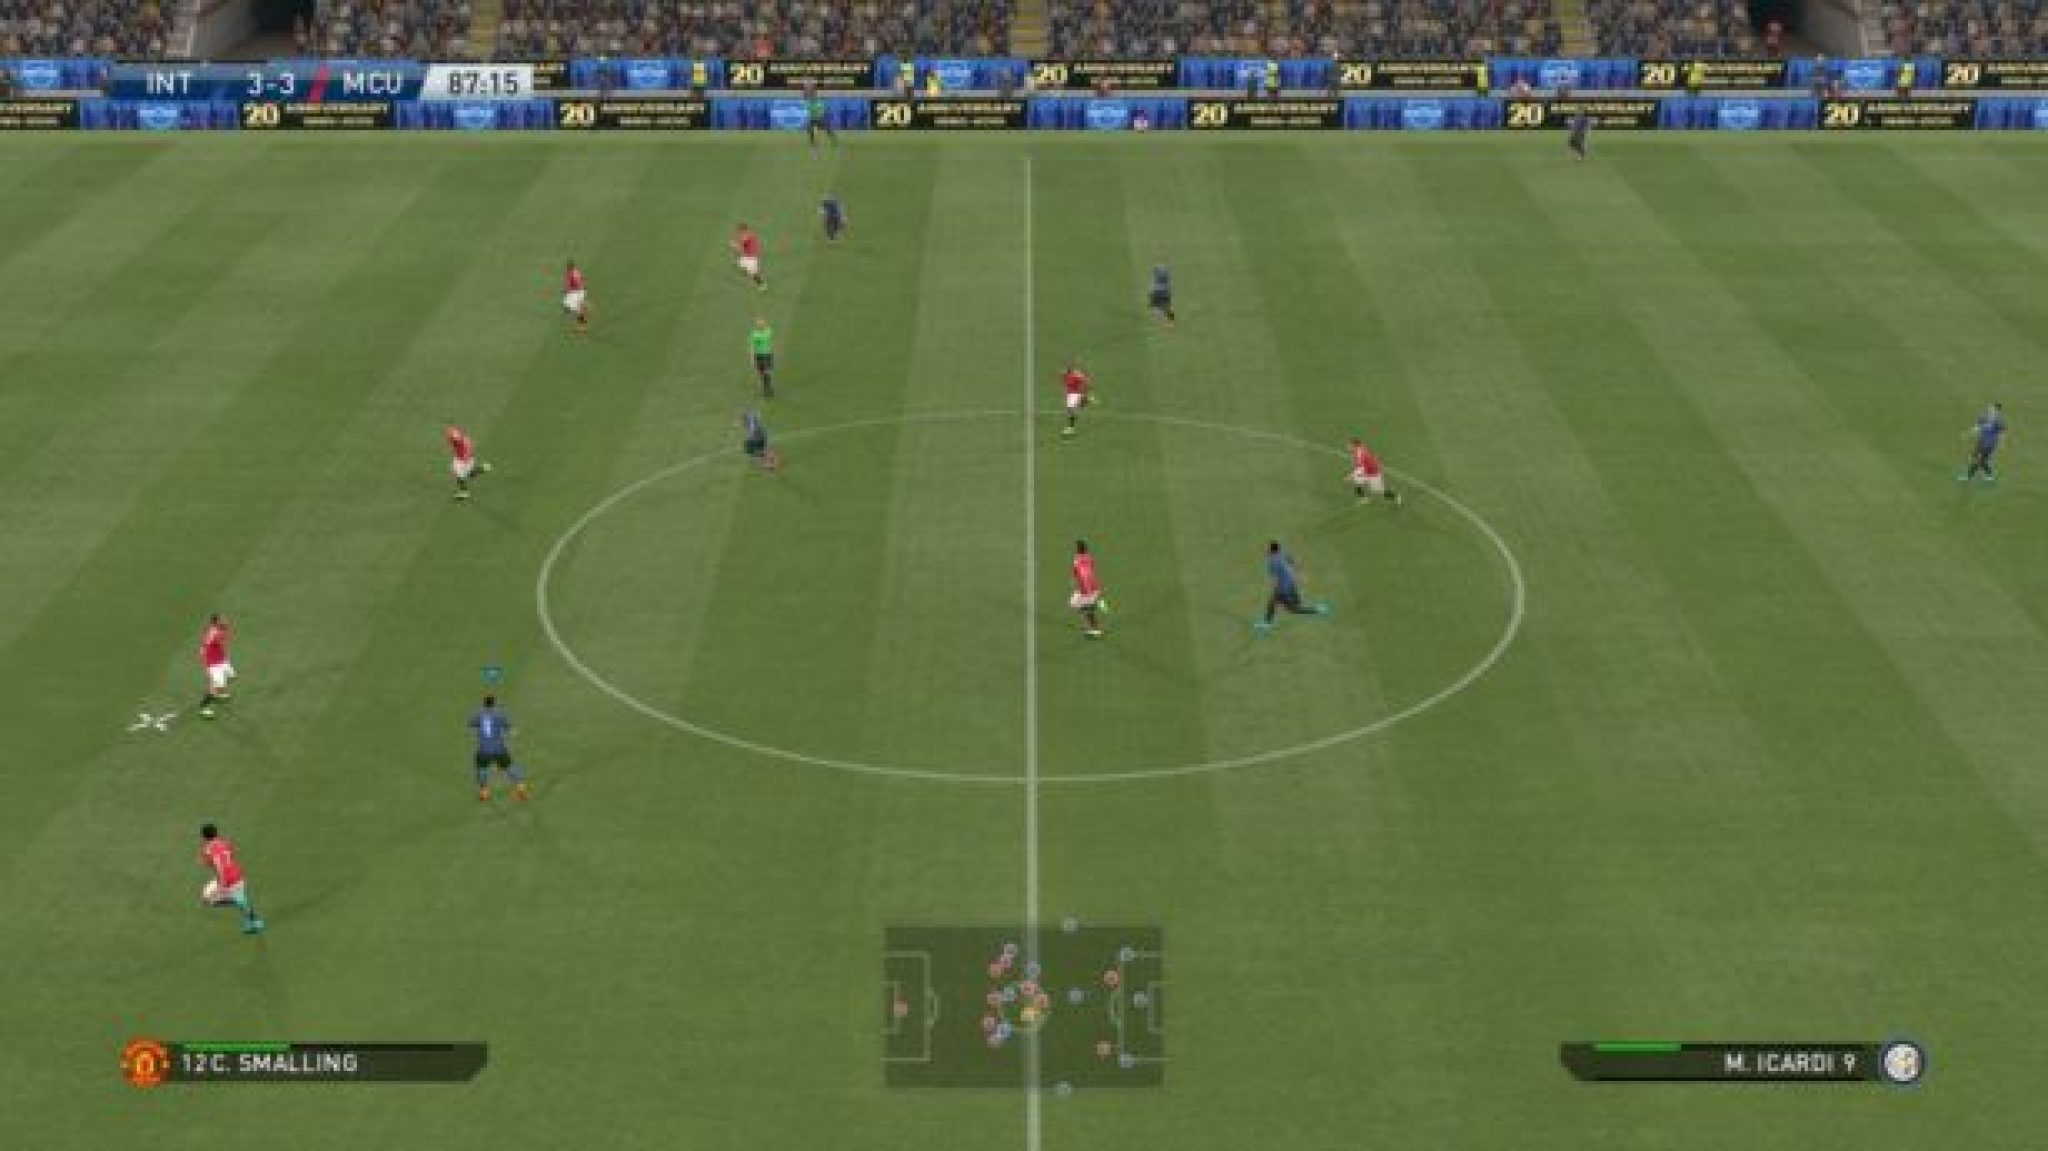 download game pes 2013 highly compressed 10mb image